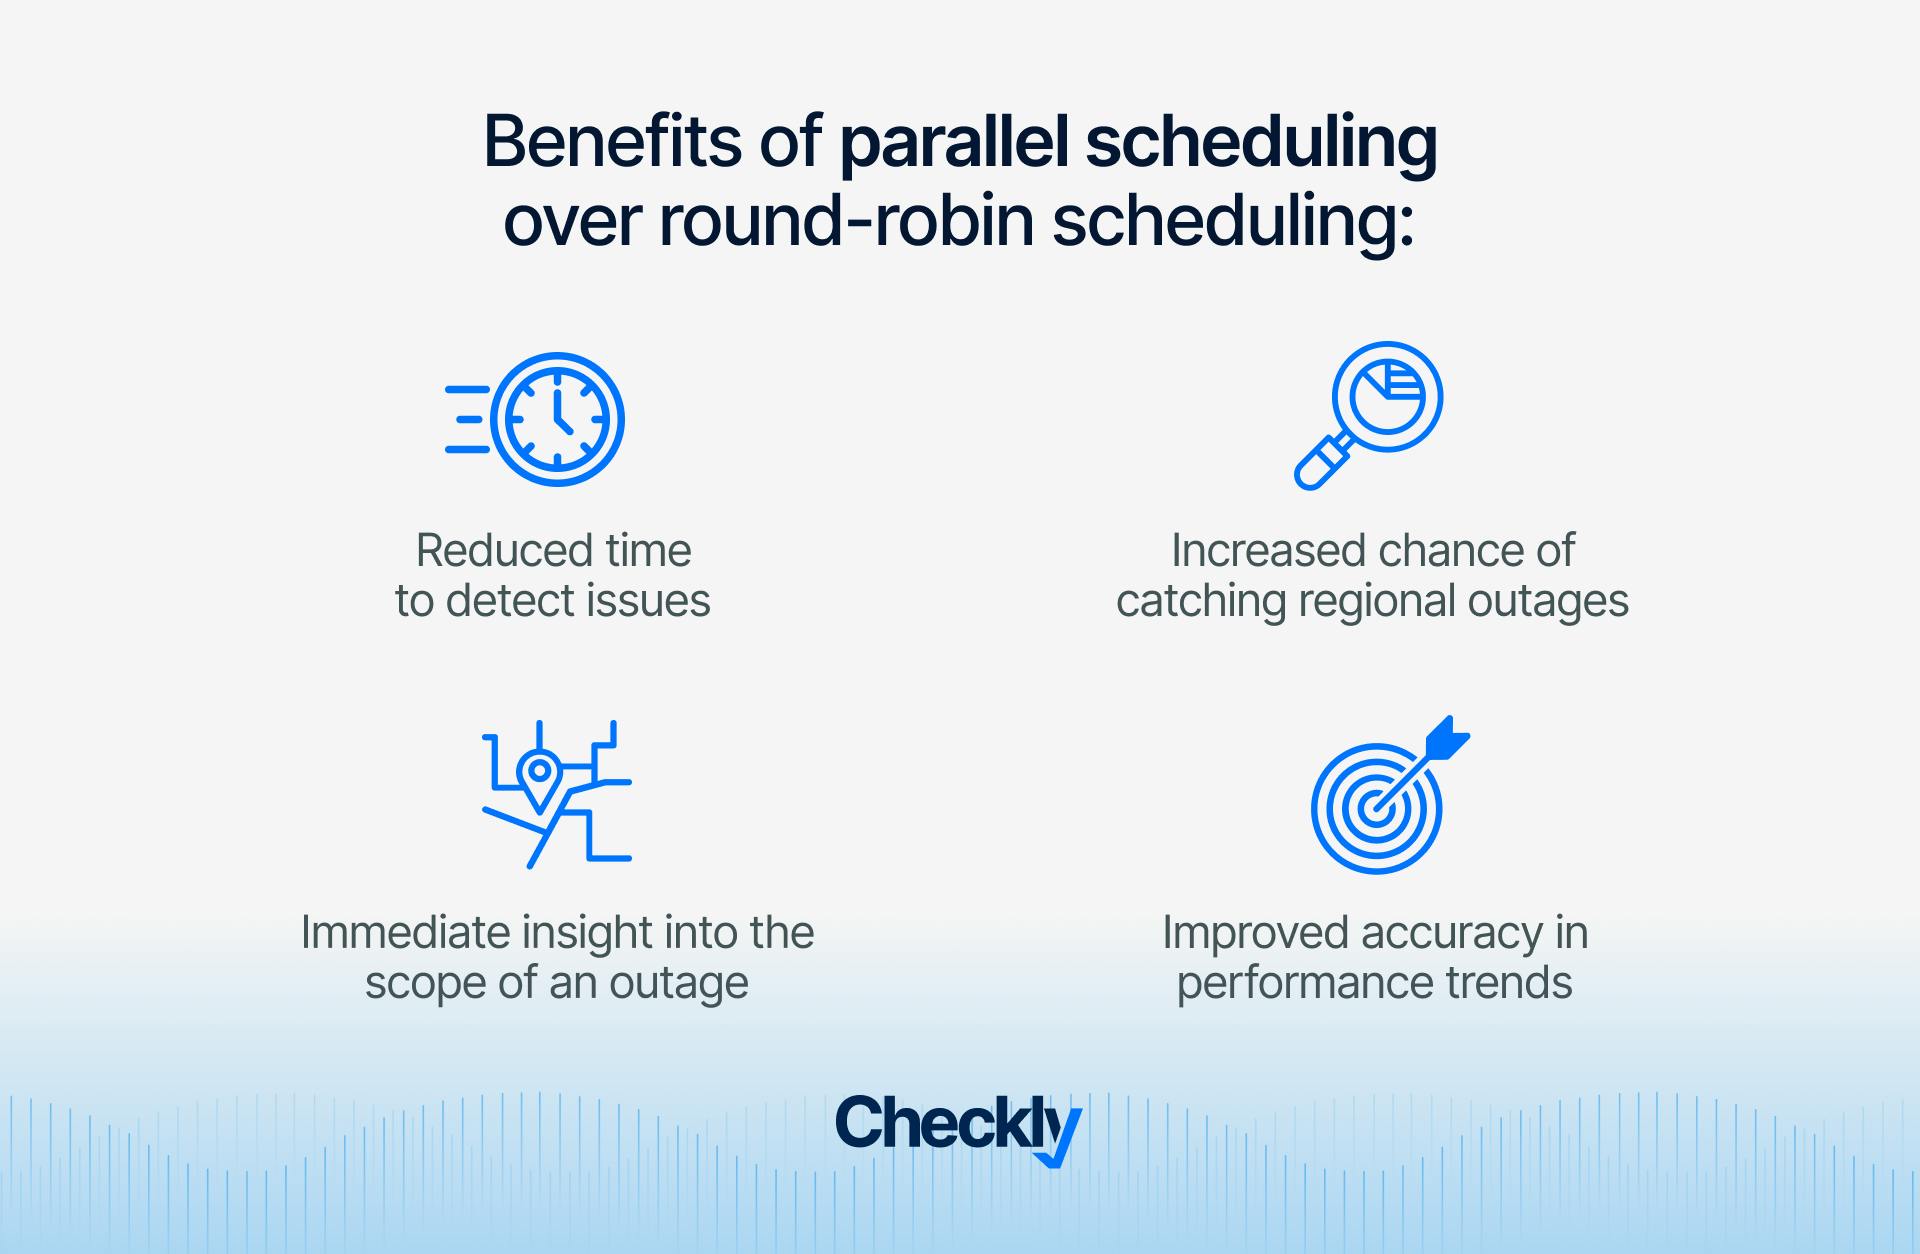 Benefits of parallel scheduling over round-robin scheduling from reduced time to detect issues, increased chances of catching regional outages to immediate insight into the scope of an outage and improved accuracy in performance trends